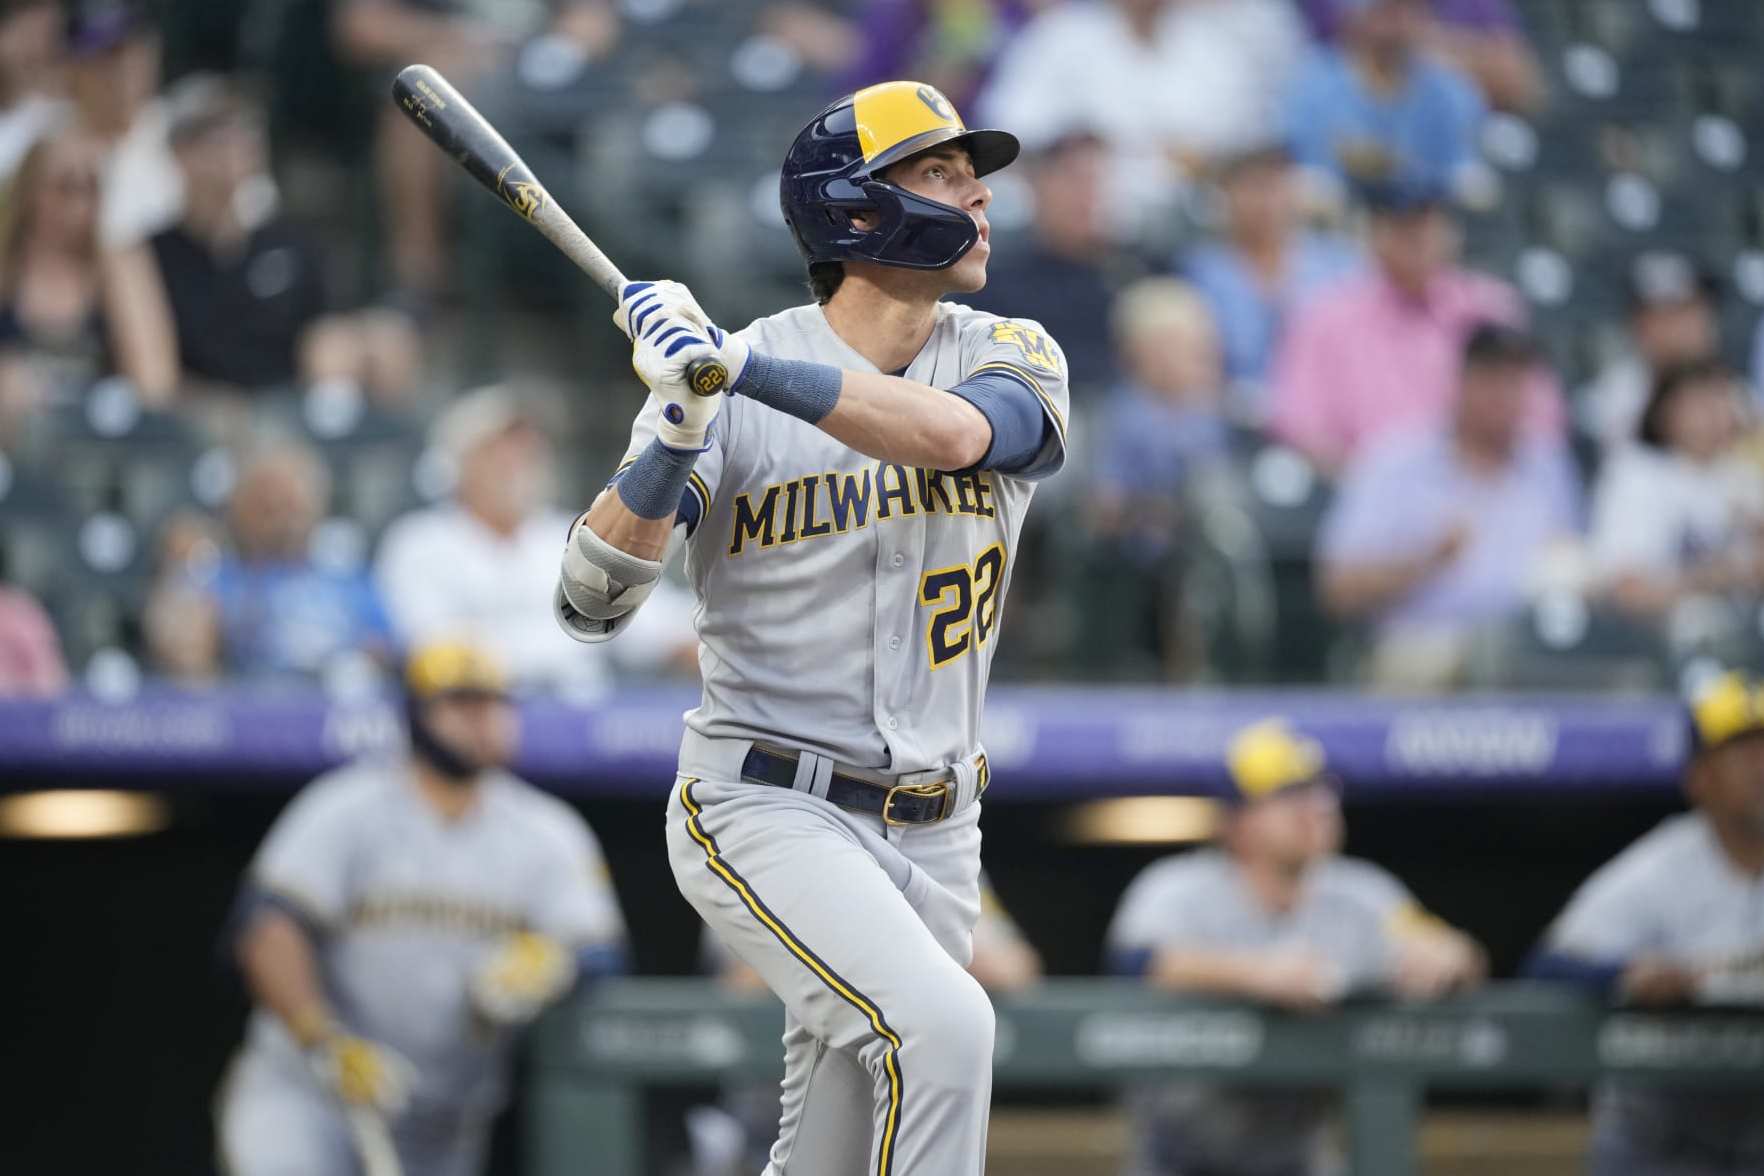 ESPN on X: The 2019 Home Run Derby bracket is set ⚾️ MLB HR leader  Christian Yelich headlines the field of eight that will face off on Monday  at 8PM ET on